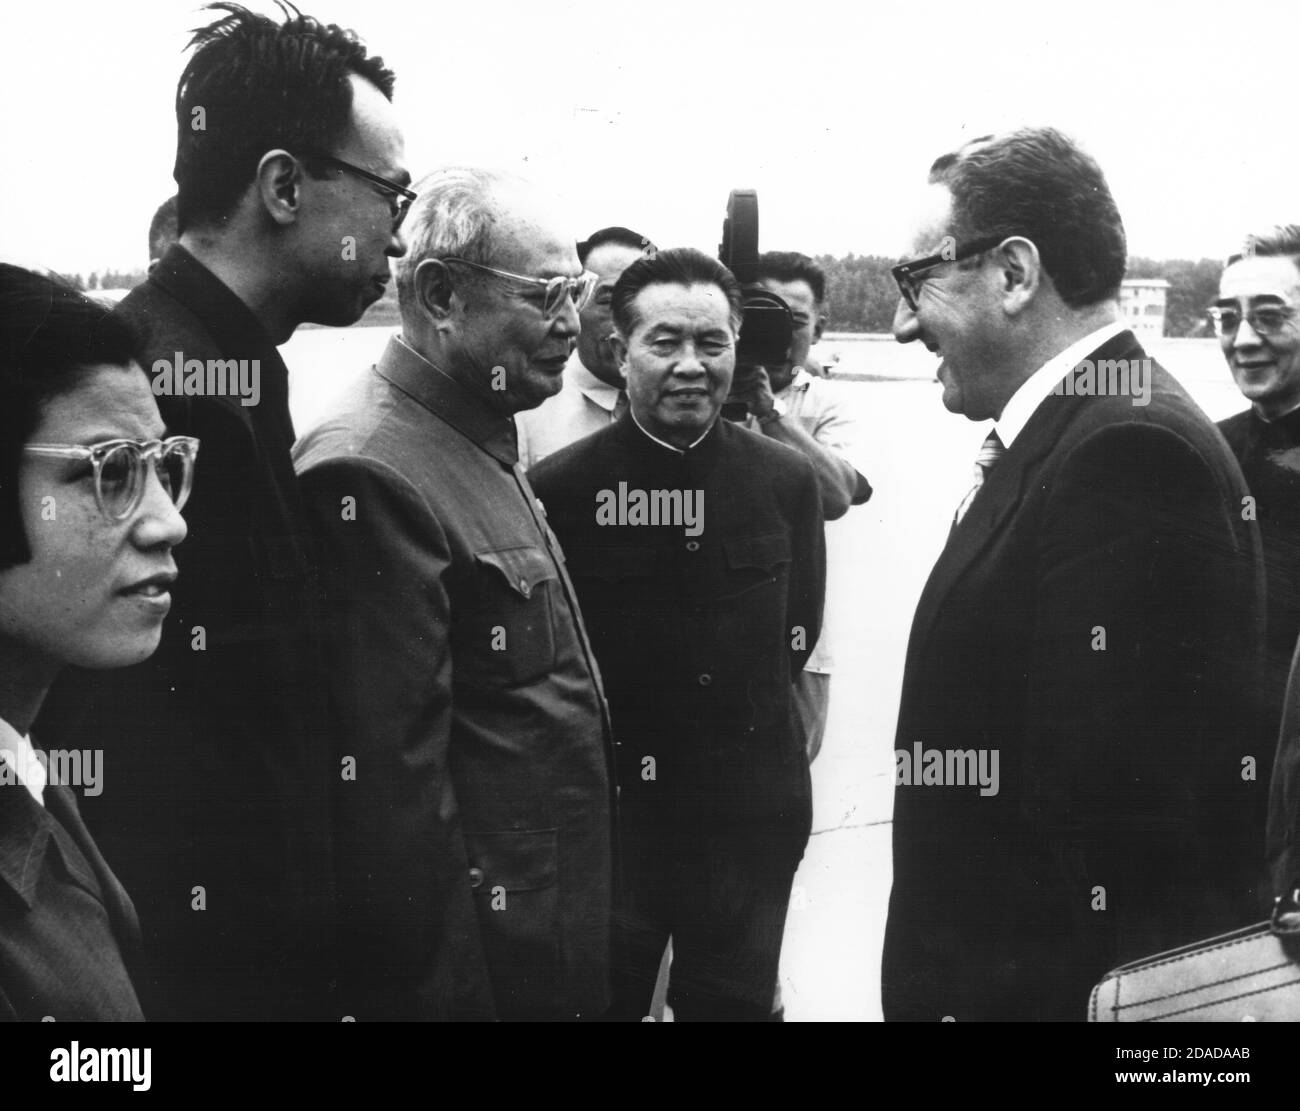 In this photo released by the White House, Dr. Henry A. Kissinger, Assistant to the President (Nixon) for National Security Affairs, second right, is greeted on his arrival in Beijing, China on July 9, 1971. Welcoming Kissinger, from left to right: unidentified Deputy Chief-of-Protocol; unidentified interpreter; Yeh Chien-ying, Vice Chairman, Military Affairs Commission, Chinese Communist Party; Huang Hua, Ambassador of China to Canada; and at far right, behind Dr. Kissinger, Chang Wen-chin, Director, Western Europe and American Department, Chinese Ministry of Foreign Affairs. Dr. Kissinger Stock Photo